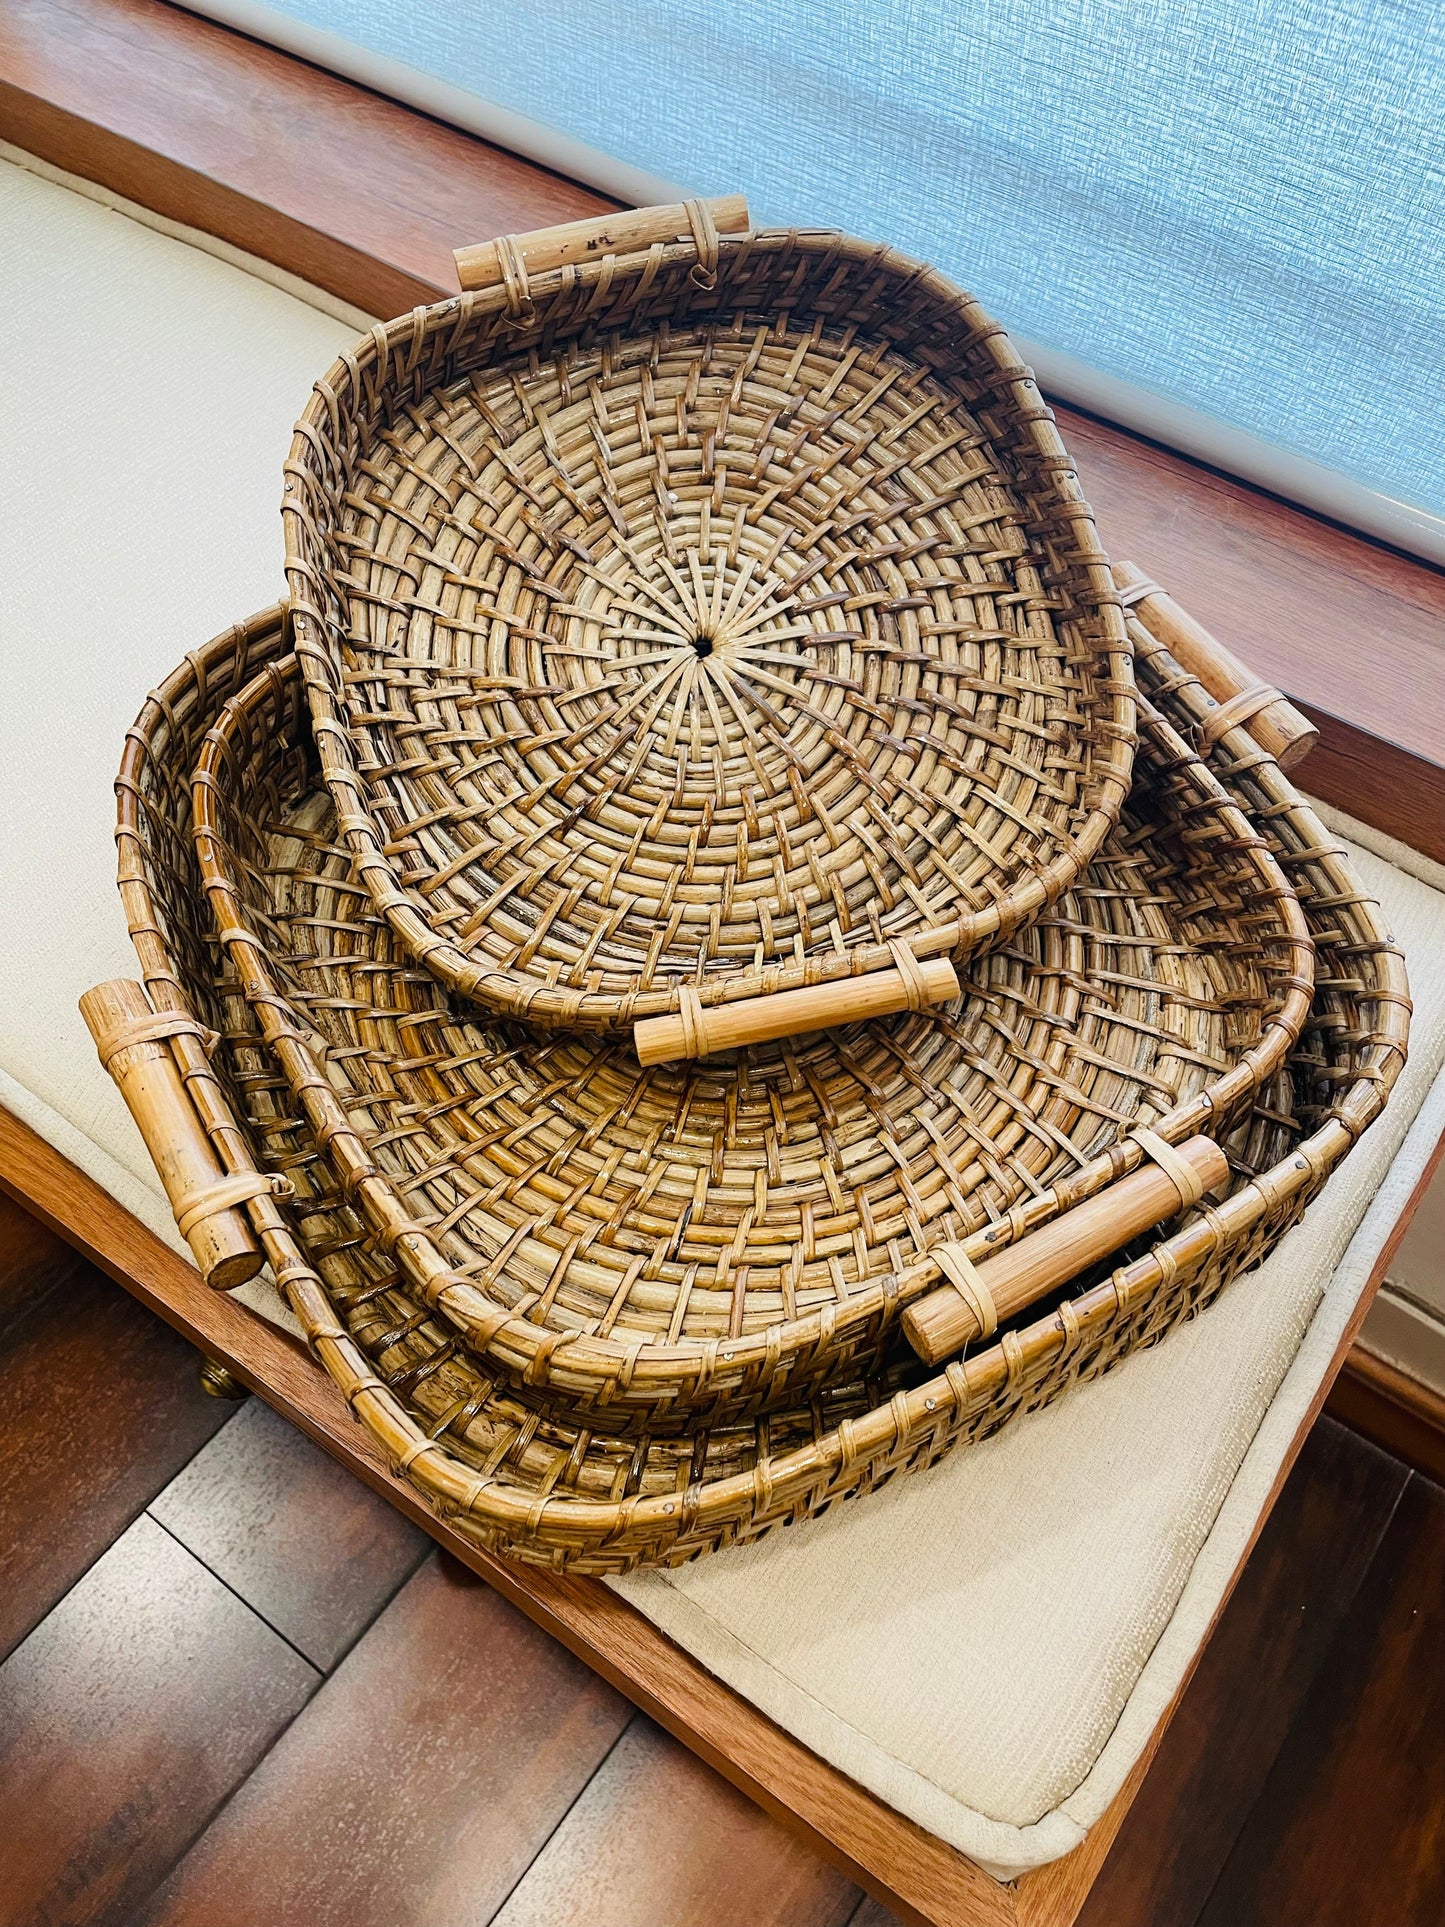 Handwoven Cane Tray With Wooden Handle - Square